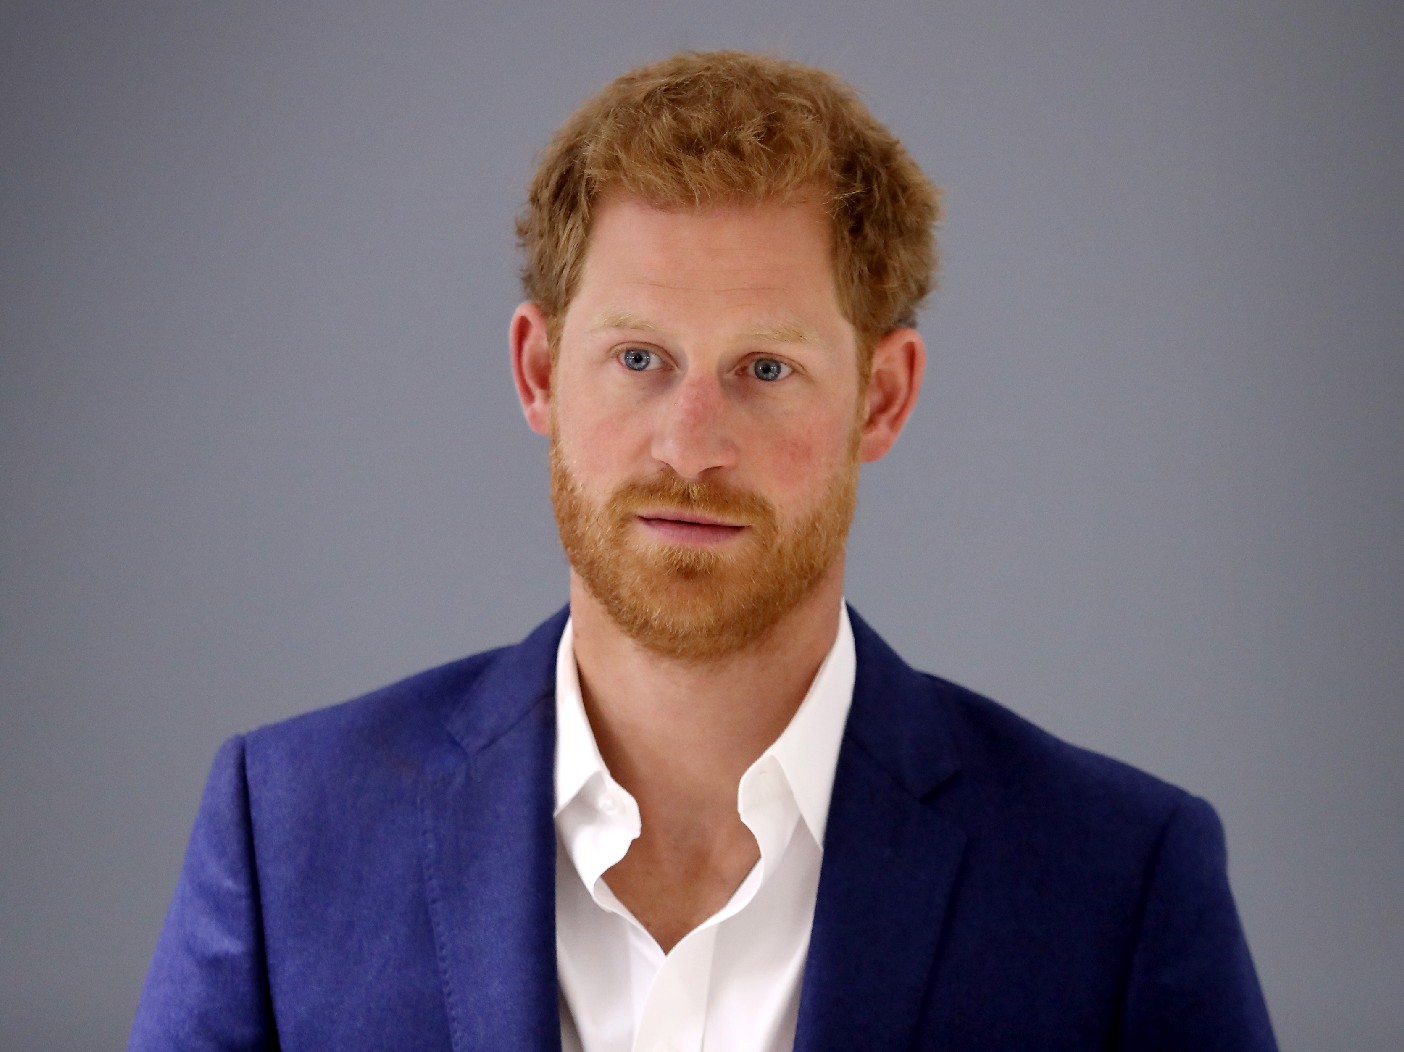 Prince Harry Allegedly ‘Annoyed’ Netflix In Hoda Kotb Interview